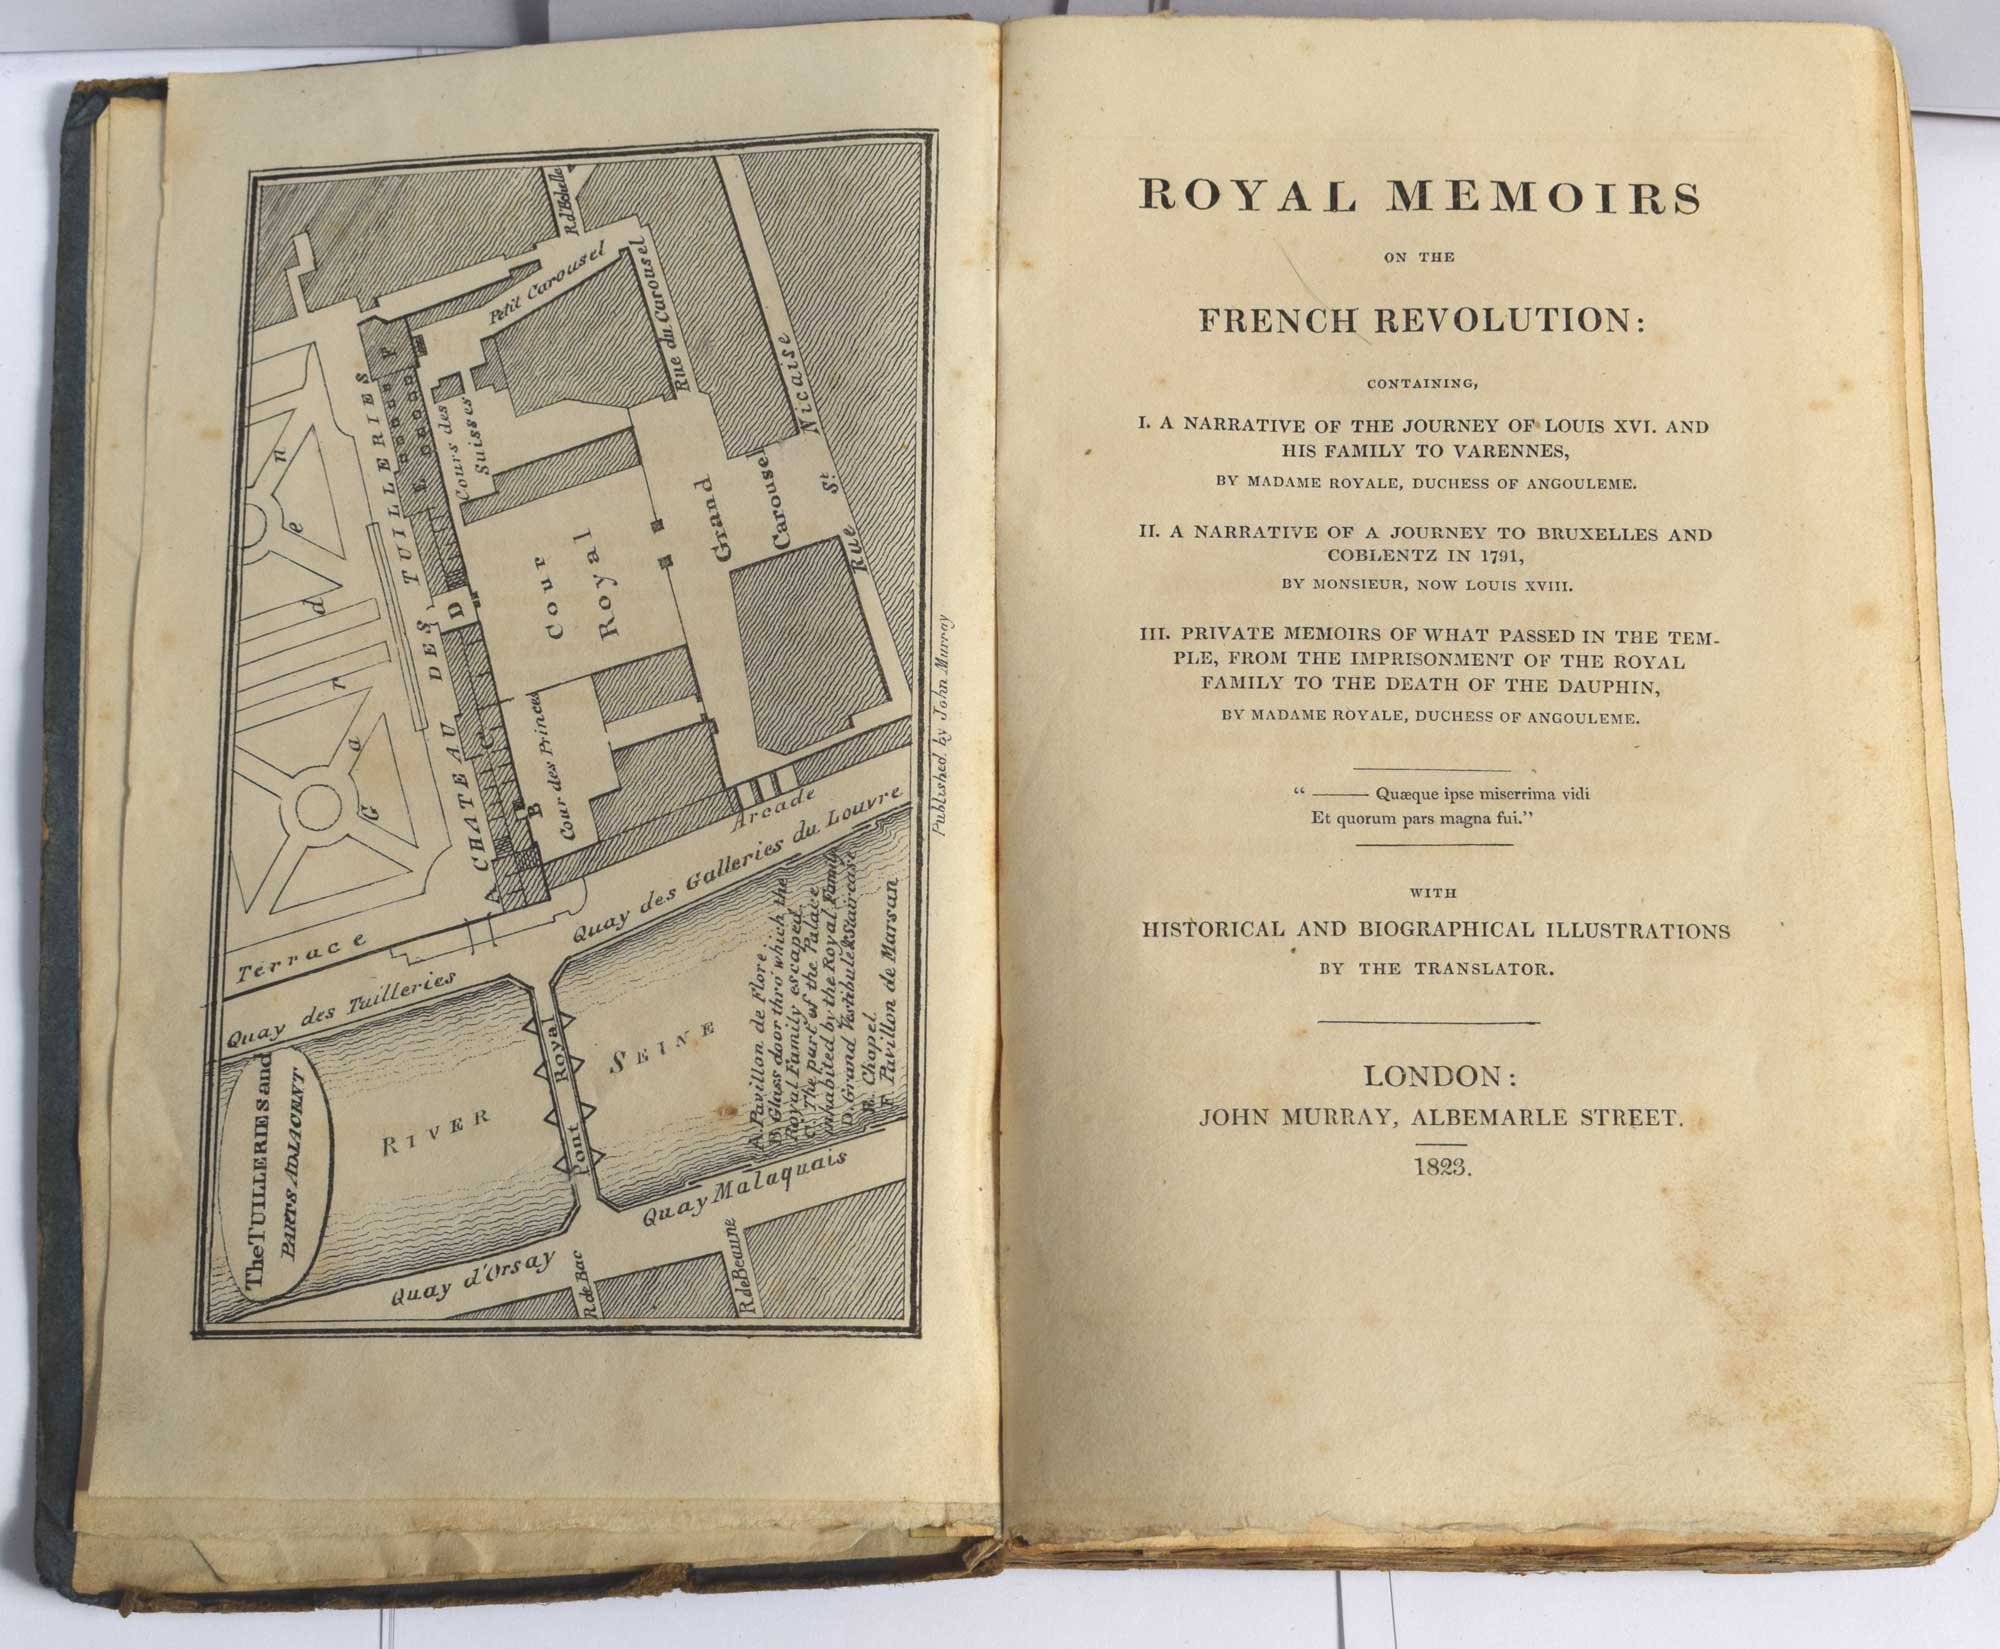 Royal Memoires on the French Revolution: Containg, I. A Narrative of the Journey of Louis XVI and his Family to Varennes, II. A Narrative of a Journey to Bruxelles and Coblentz in 1791, III. Private Memoirs of what Passed in the Temple ... to the Death of